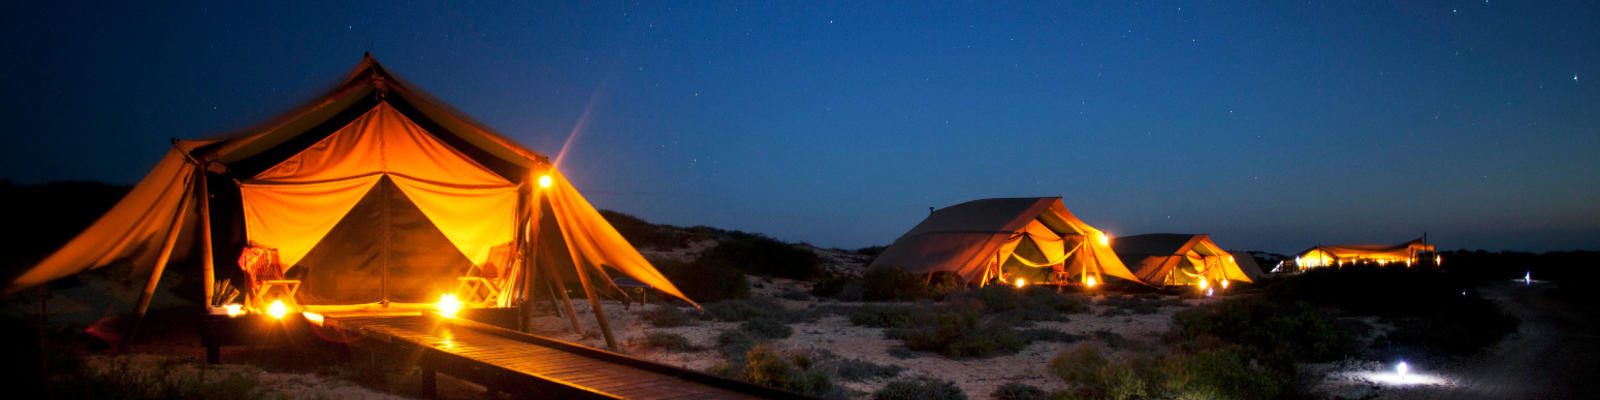 Luxury tents lit up under the starry night sky